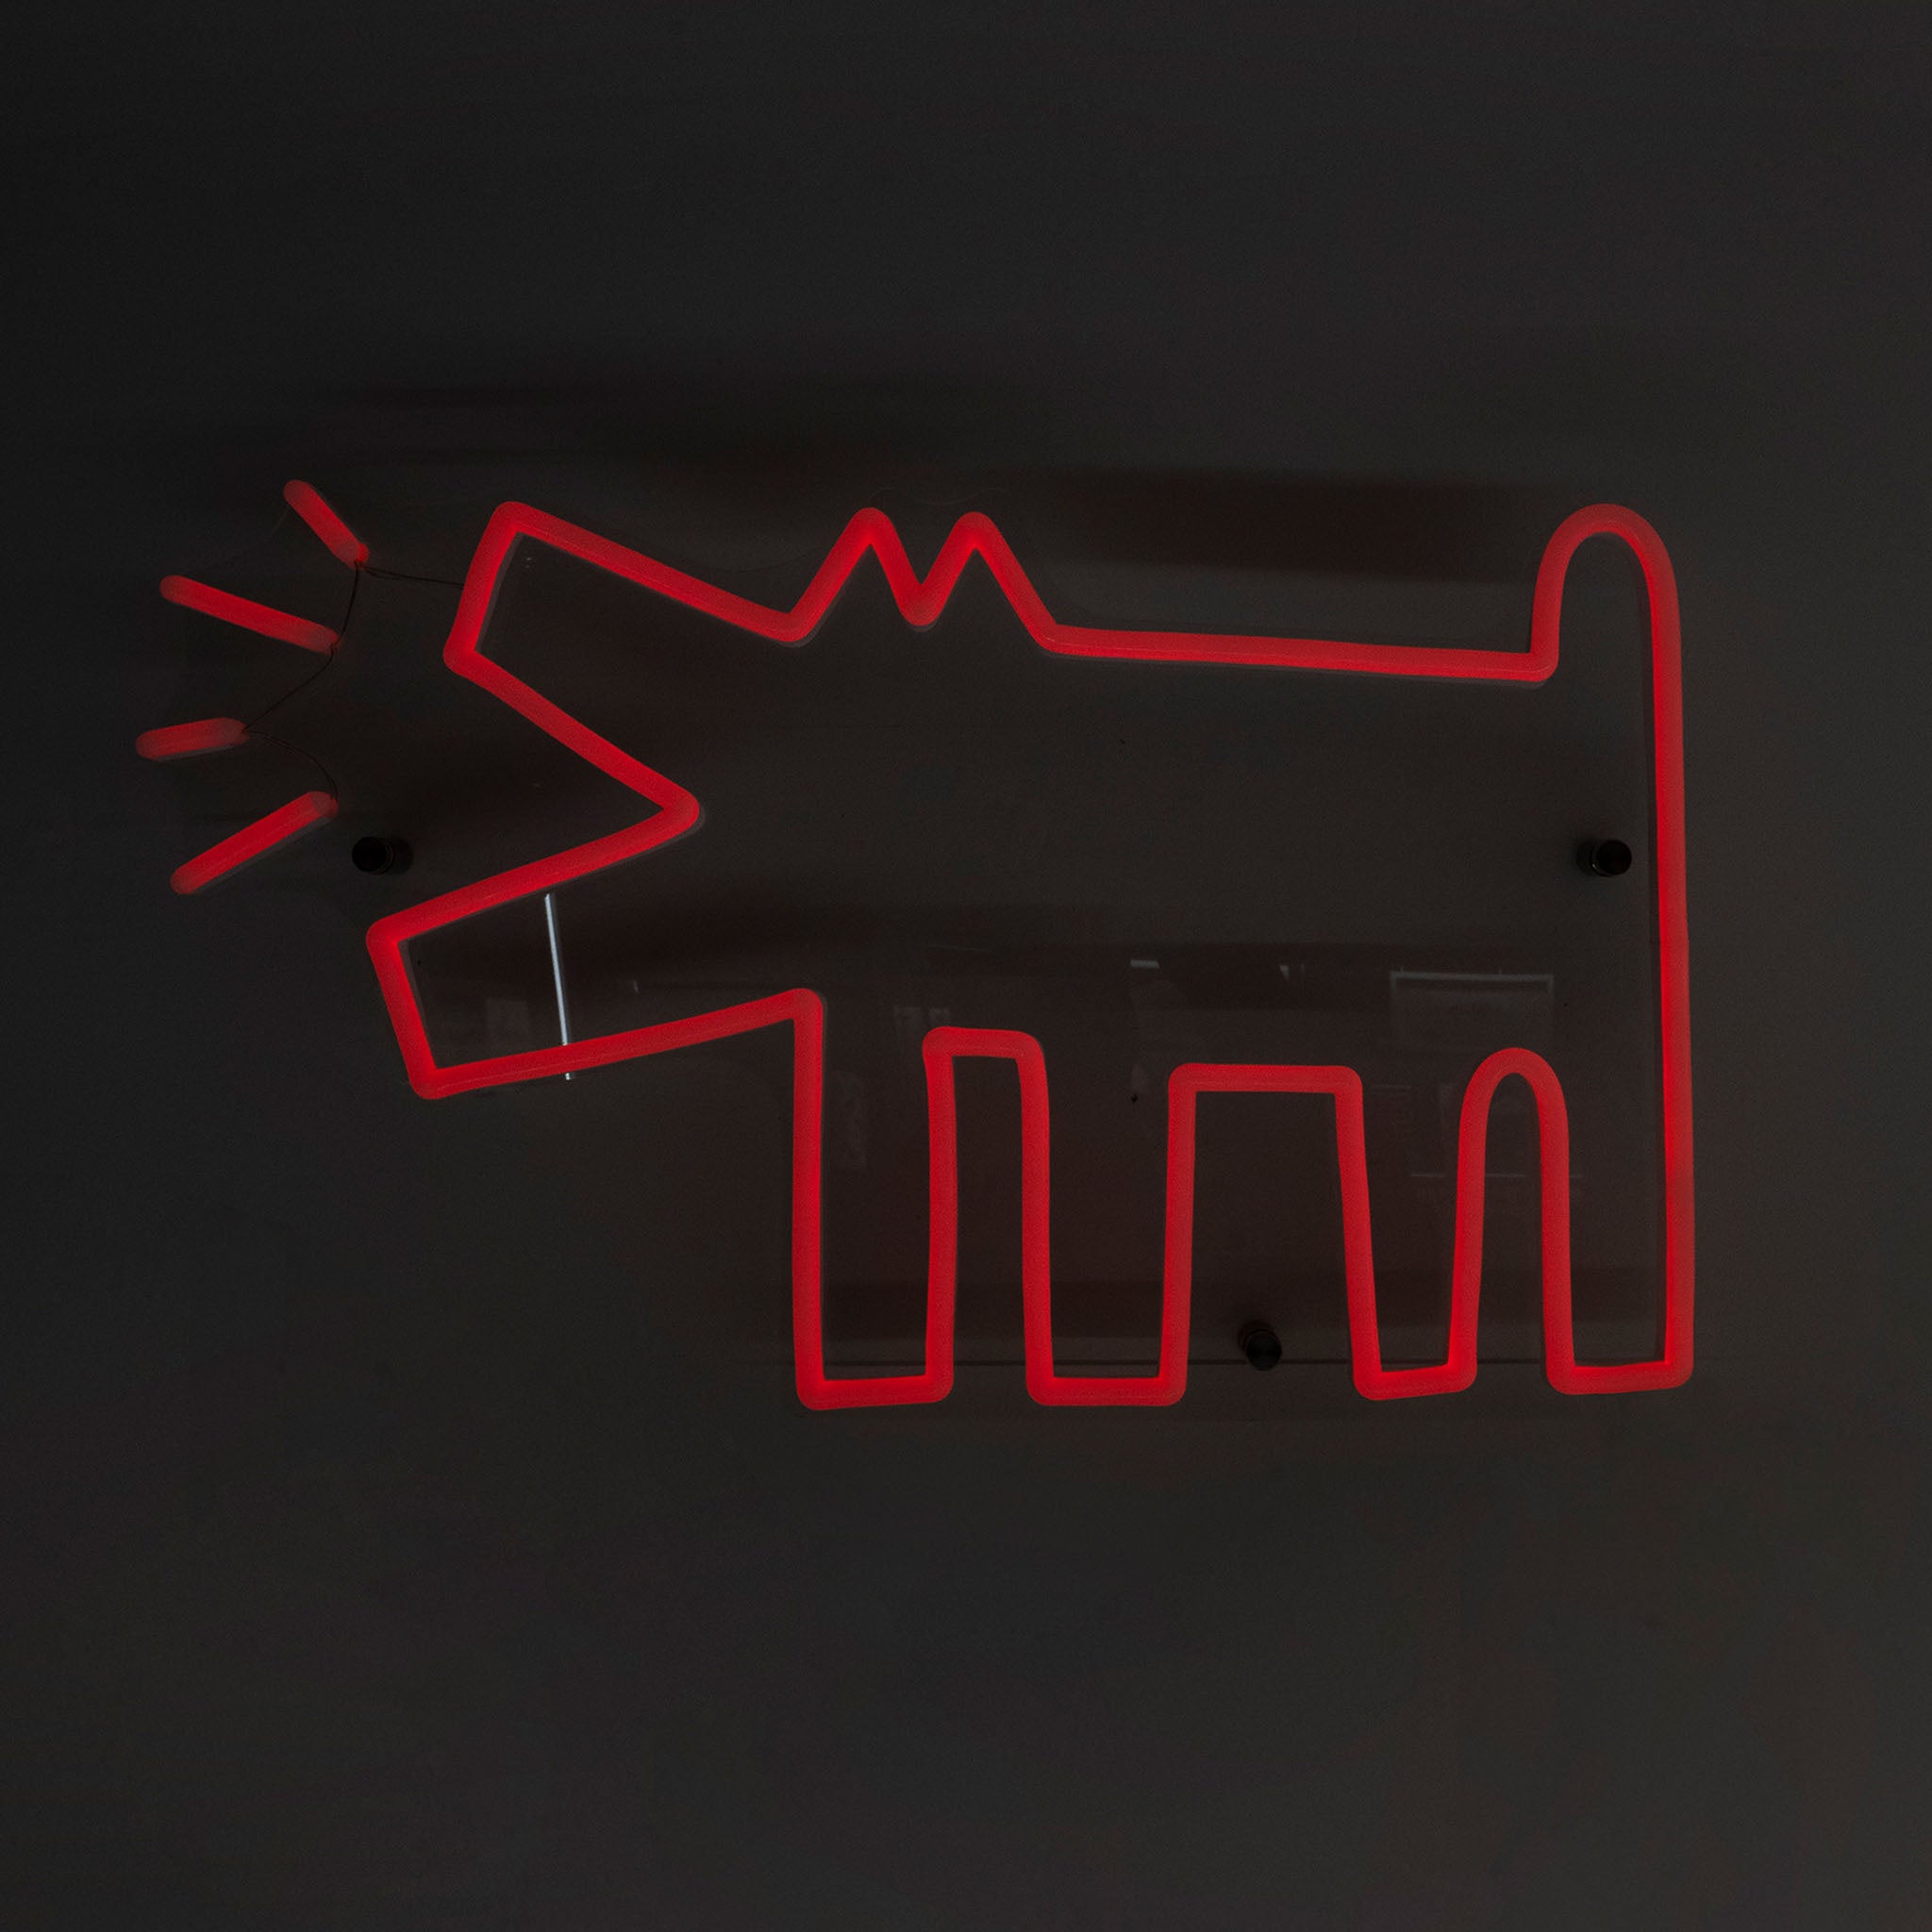 Barking Dog by Keith Haring - LED Neon Sign